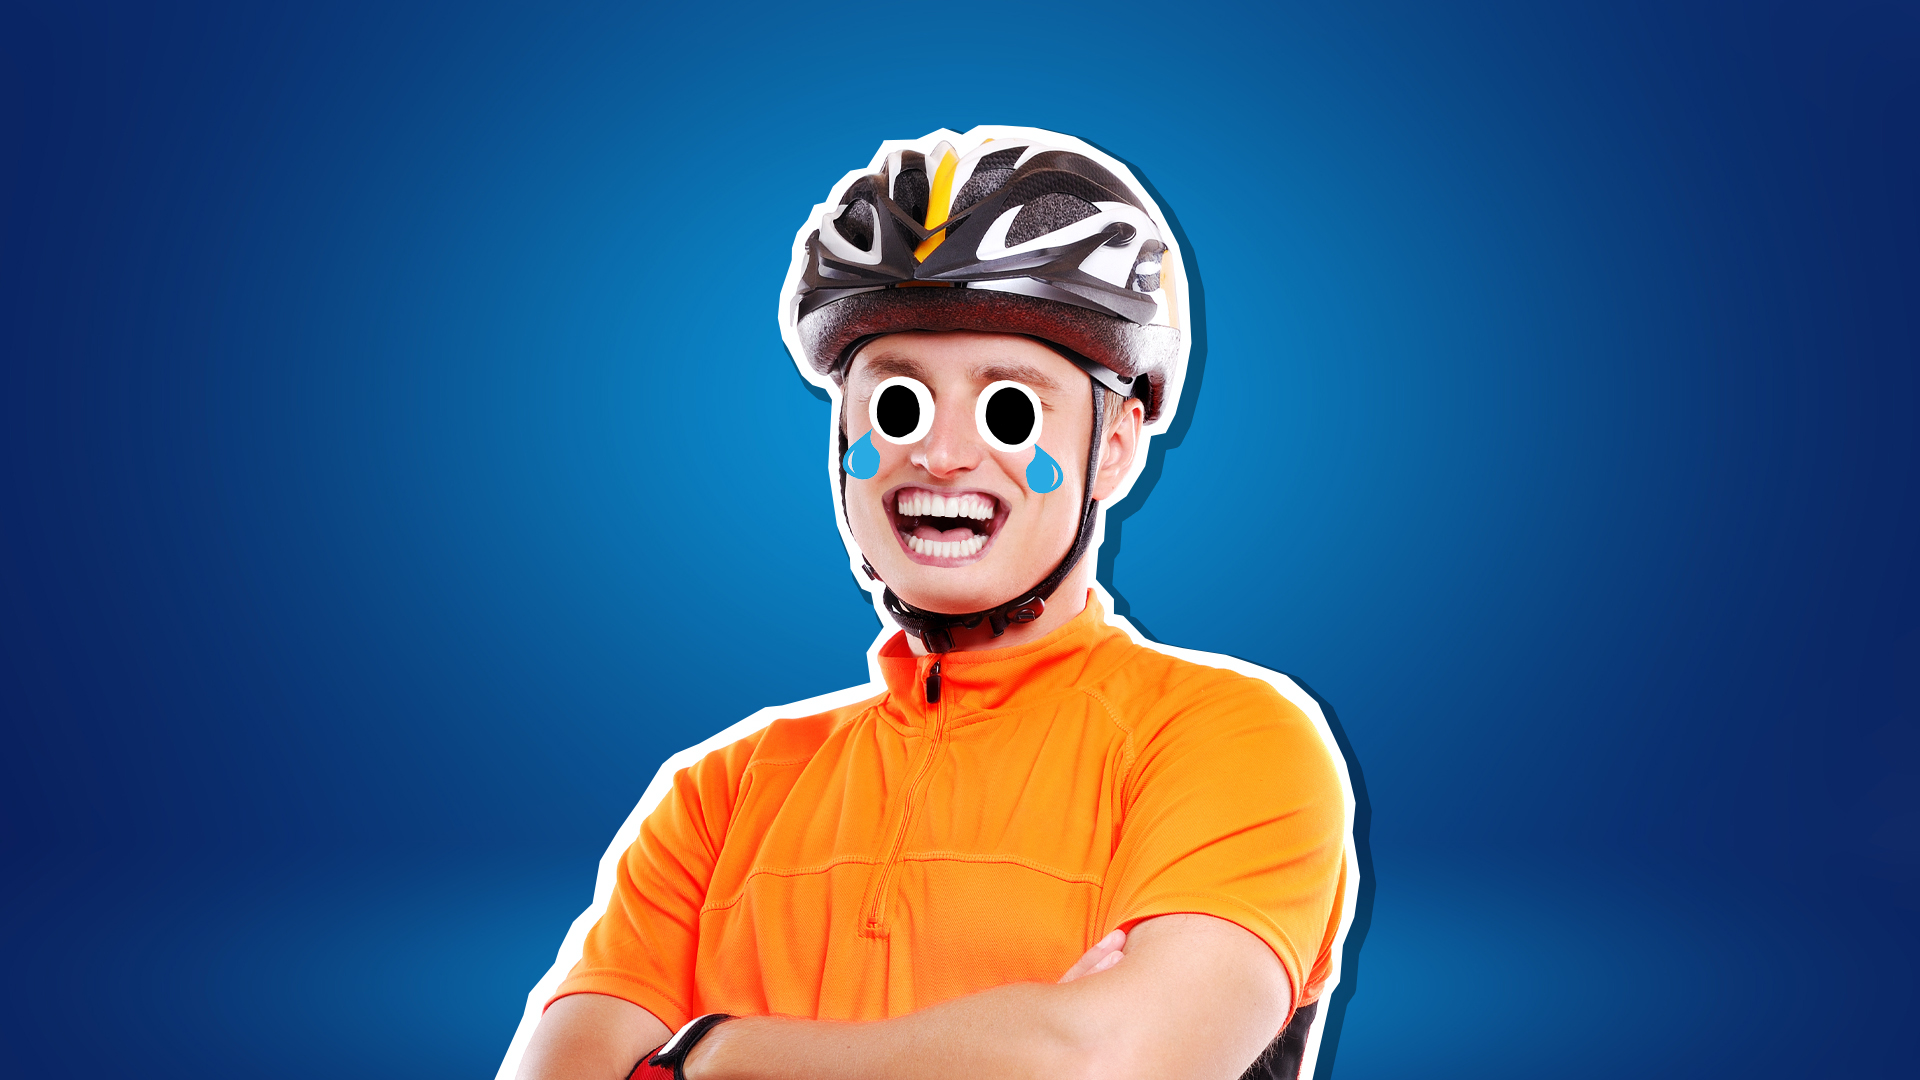 A cyclist crying with laughter